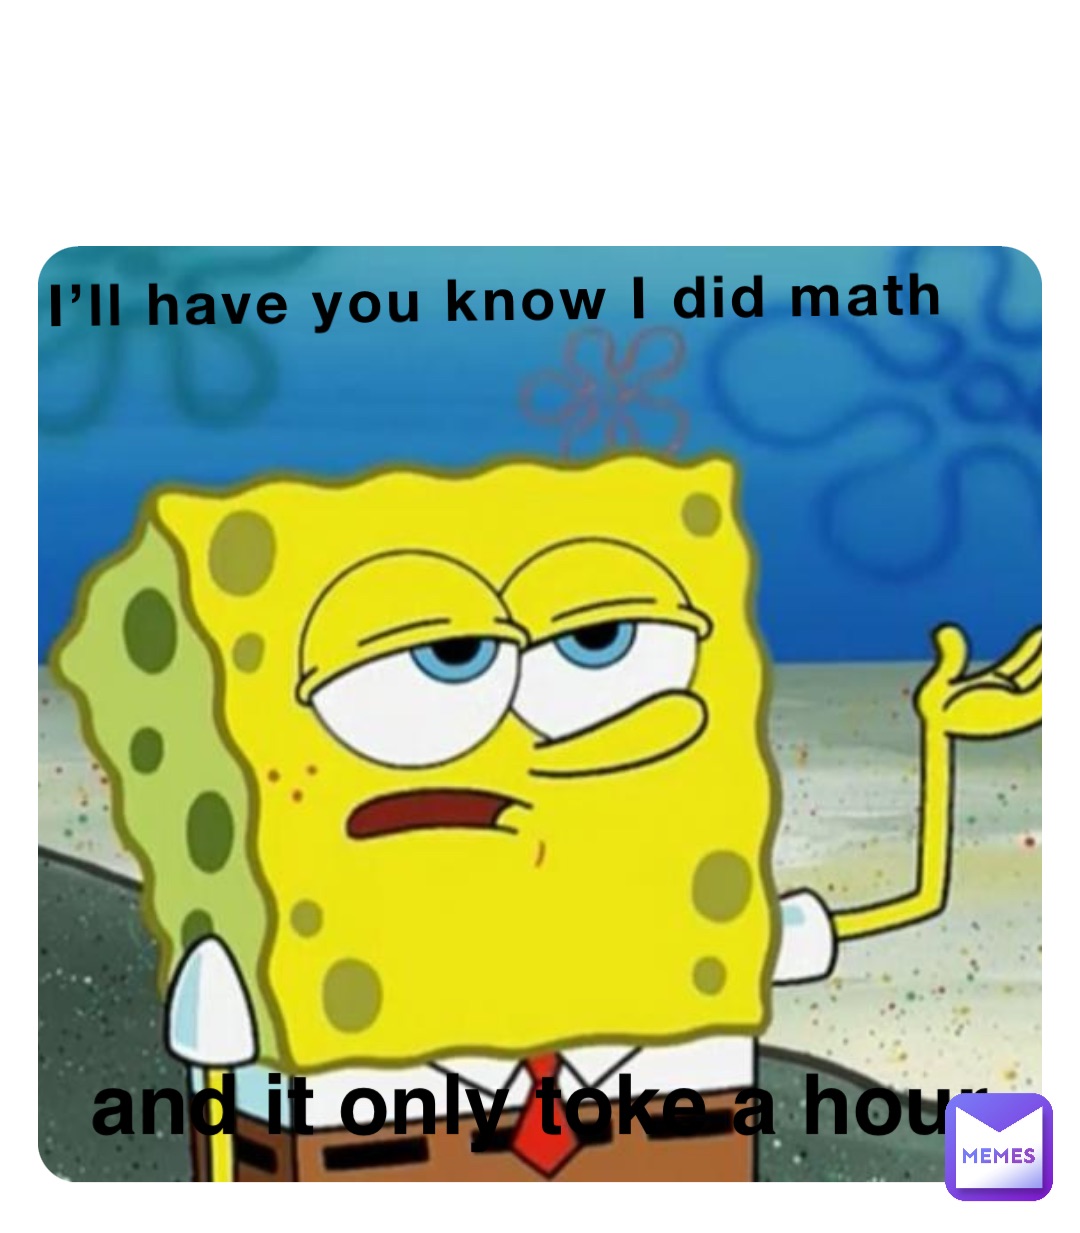 I’ll have you know I did math and it only toke a hour